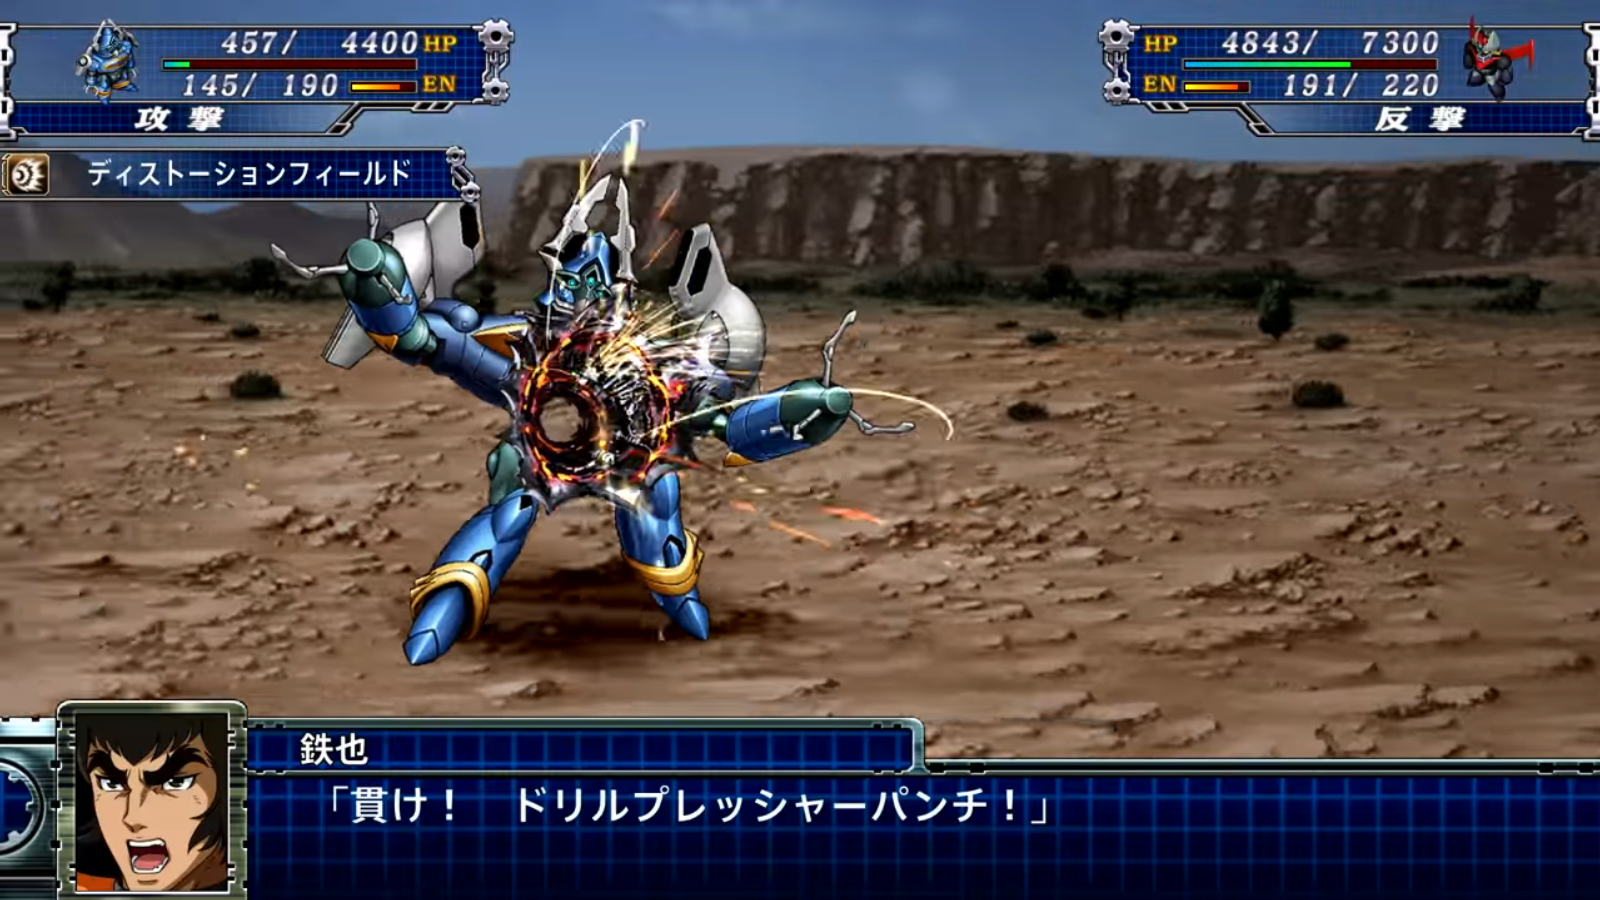 Super Robot T: 32 minutes of gameplay from the first chapter